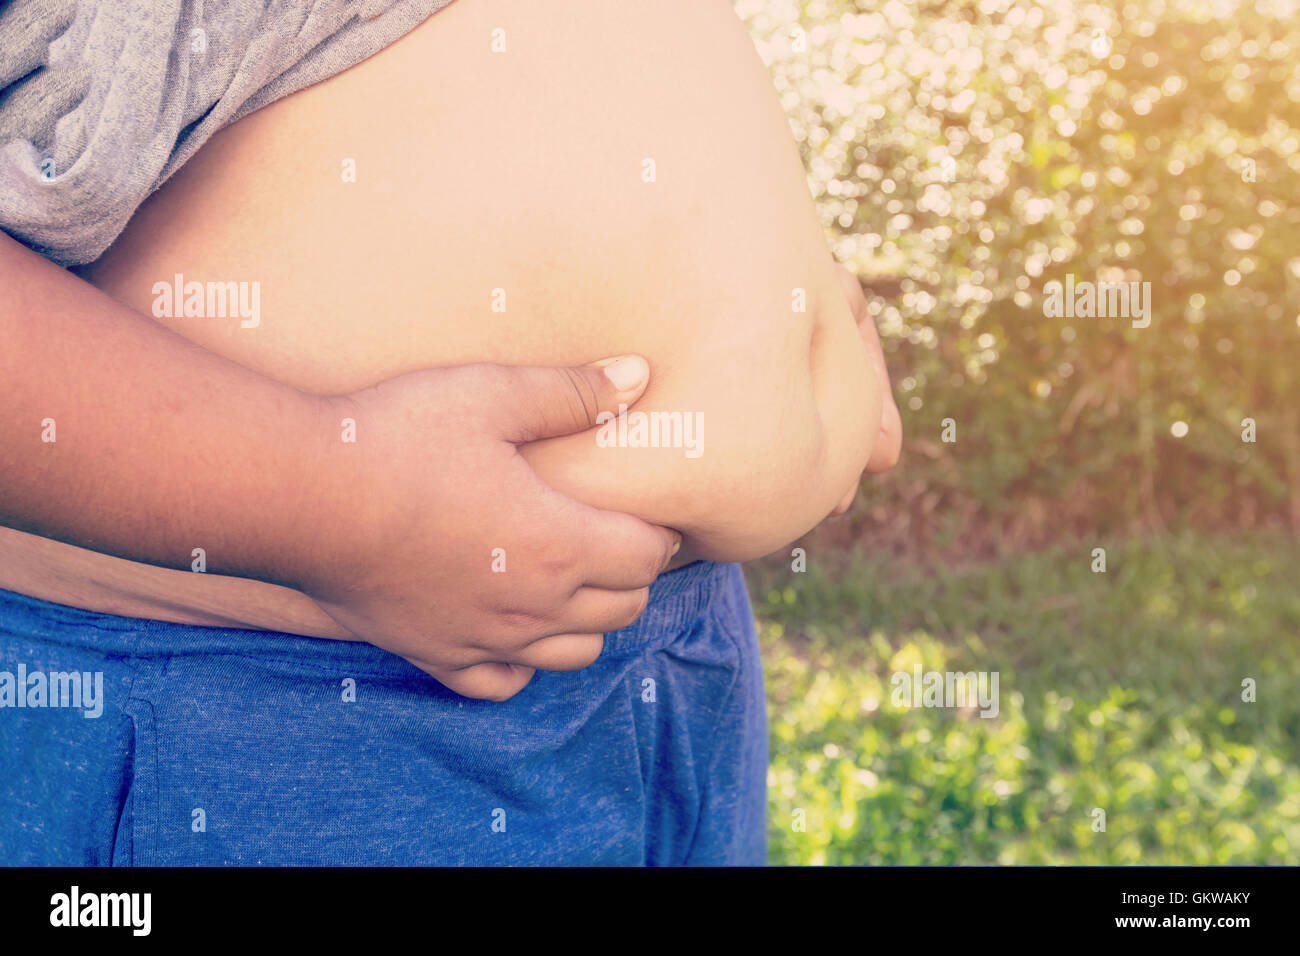 Boy fat and unhealthy with natural ilght vintage background. Stock Photo